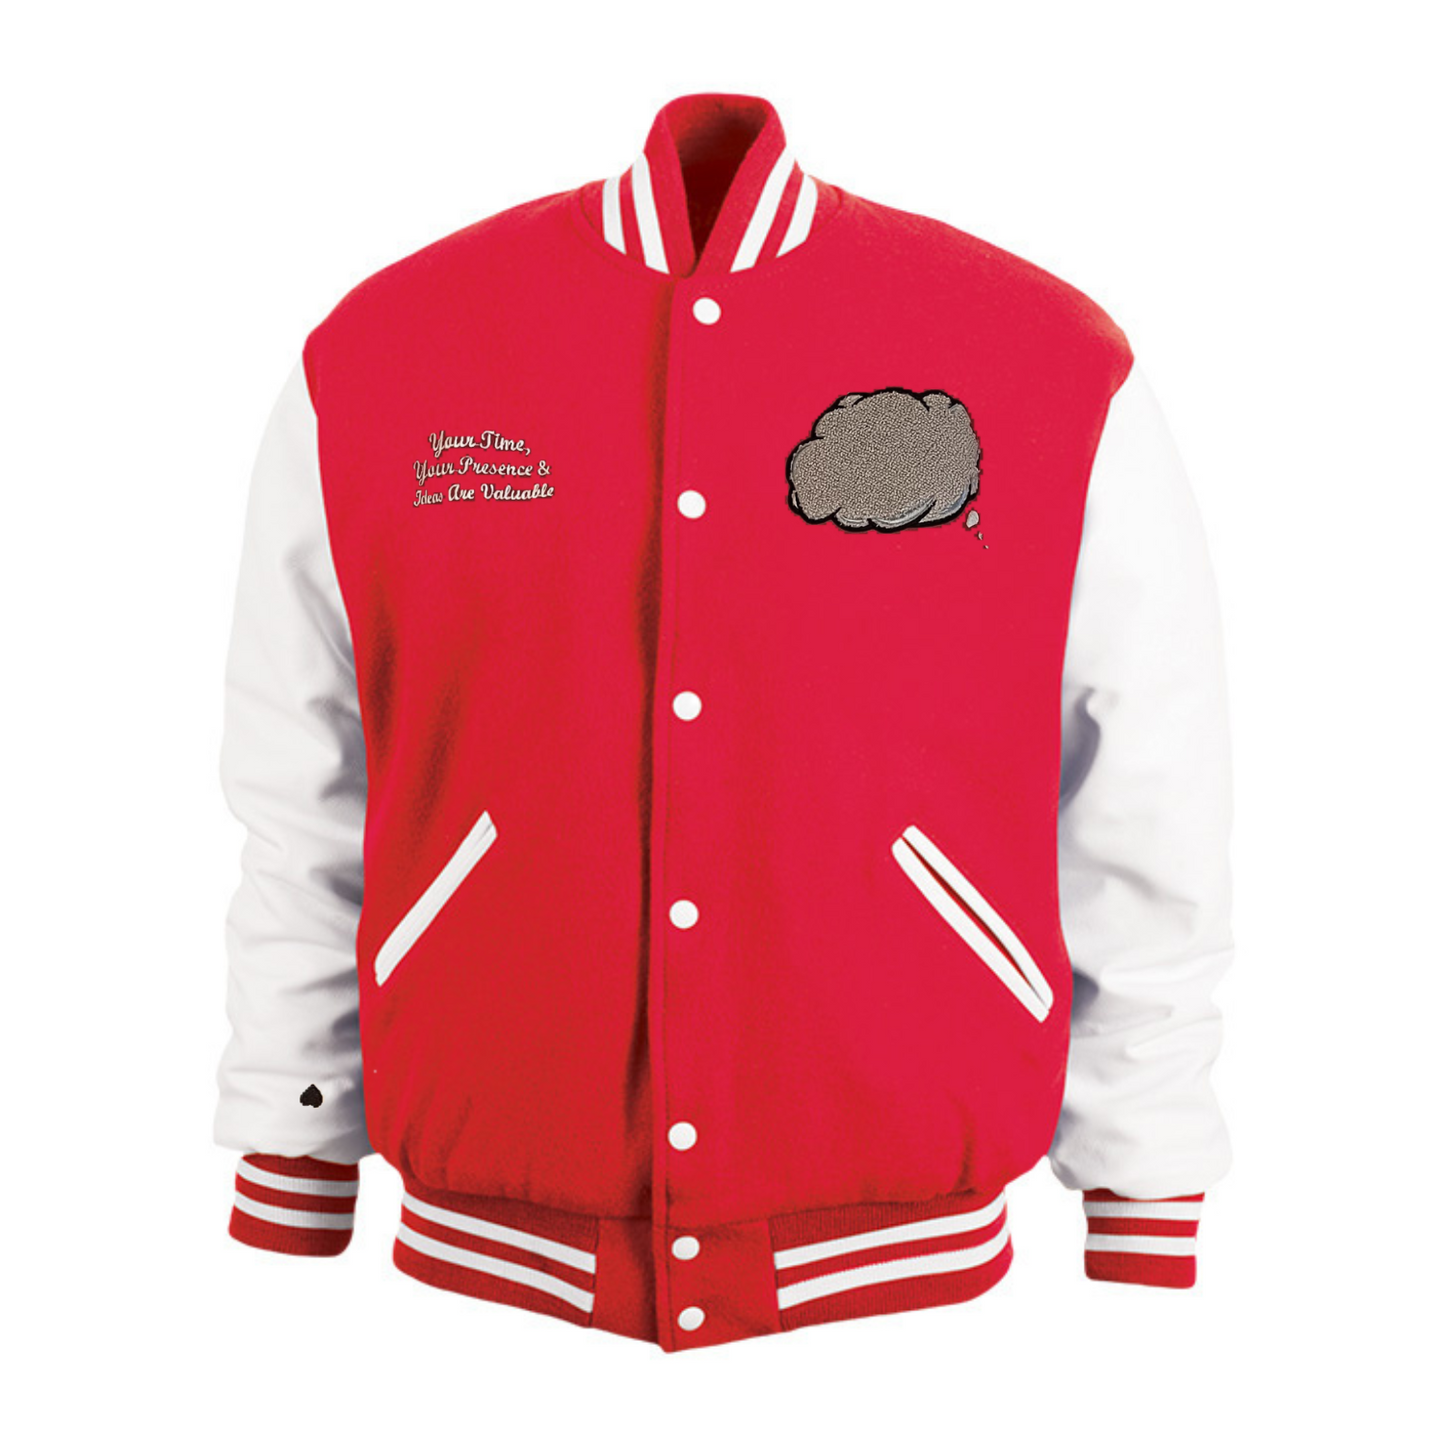 Your Next Jacket Purchase: The Letterman Jacket